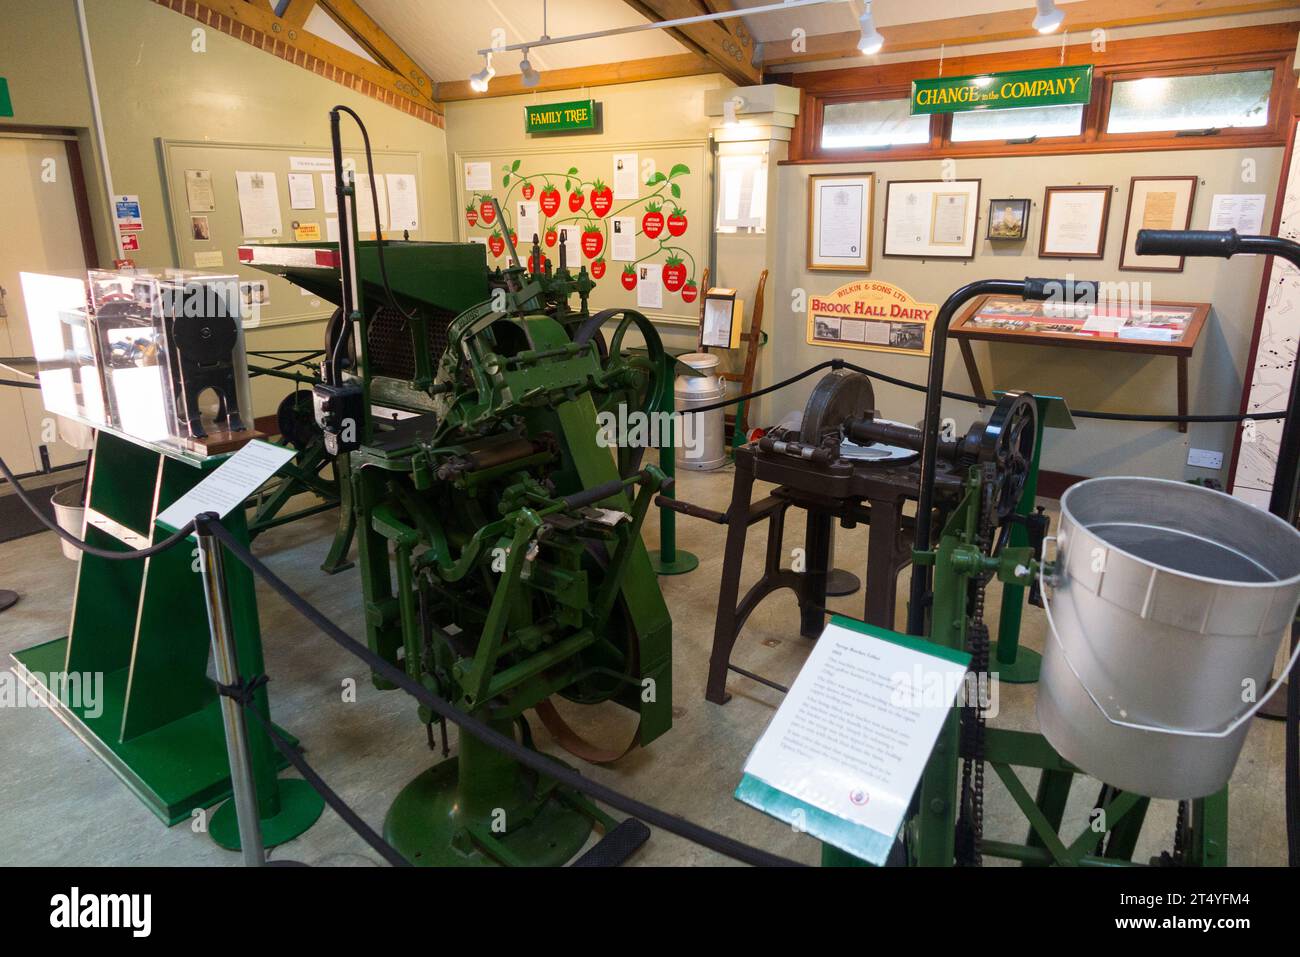 Interior display of fruit process, implements, information; Jam Museum, Wilkin & Sons Limited, manufacturer of preserves since 1885, Tiptree, Essex UK Stock Photo